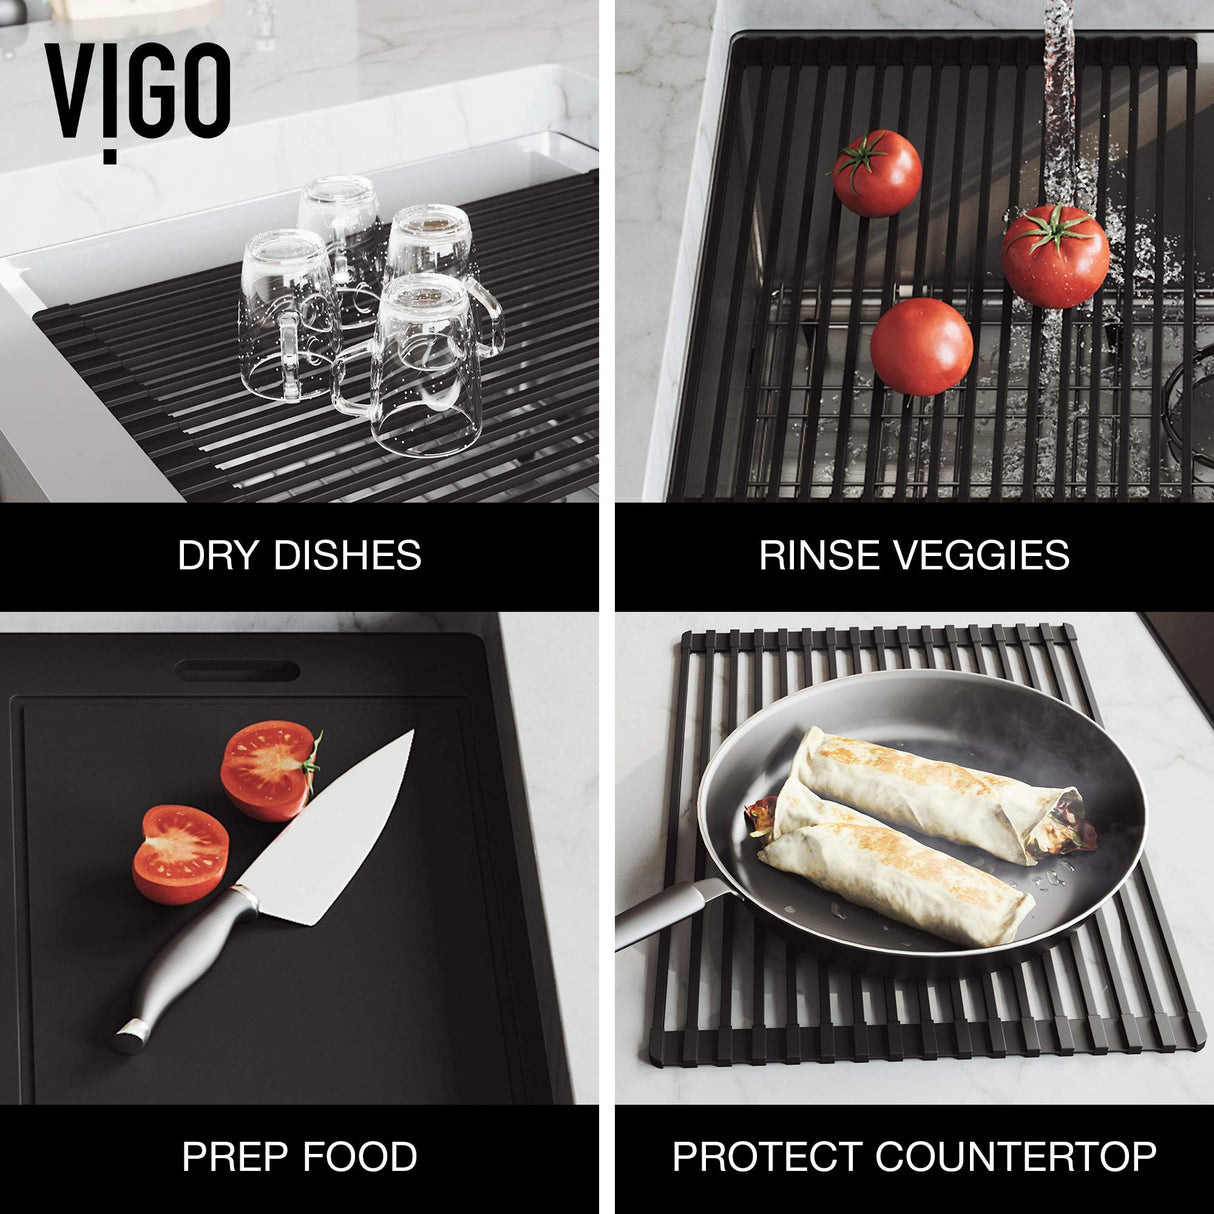 VIGO VGS3620BLFA 20.5" L -36.0" W -10.0" H Handmade Stainless Steel Double-Bowl Farmhouse Kitchen Sink Workstation with Cutting Board, Roll-Up Drying Rack, 2 Protective Bottom Grids, 2 Strainers